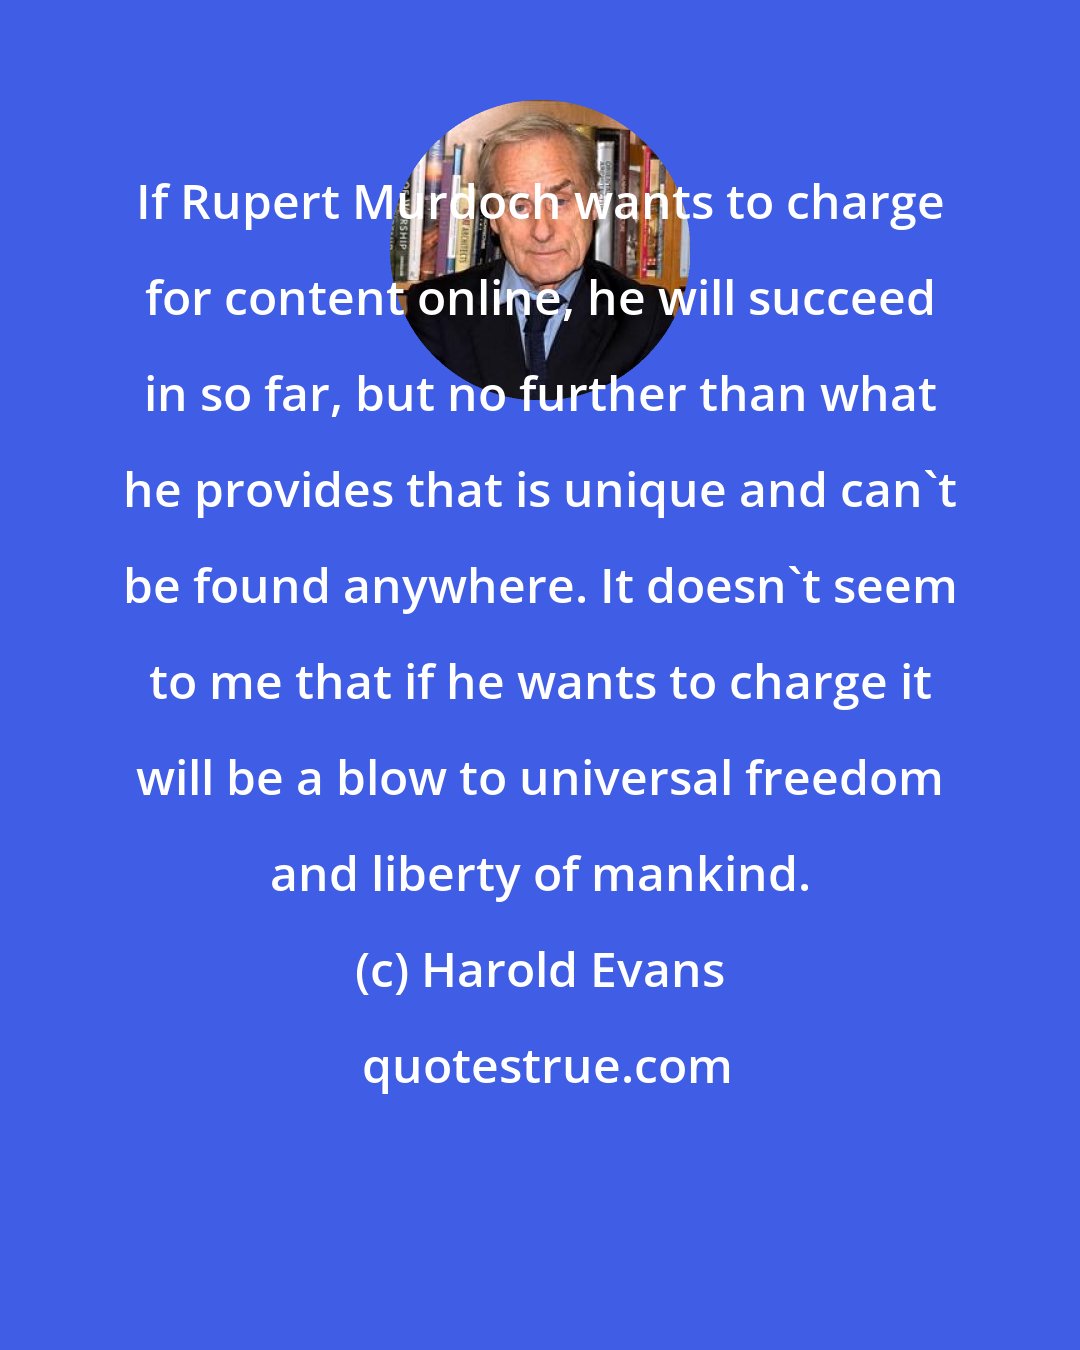 Harold Evans: If Rupert Murdoch wants to charge for content online, he will succeed in so far, but no further than what he provides that is unique and can't be found anywhere. It doesn't seem to me that if he wants to charge it will be a blow to universal freedom and liberty of mankind.